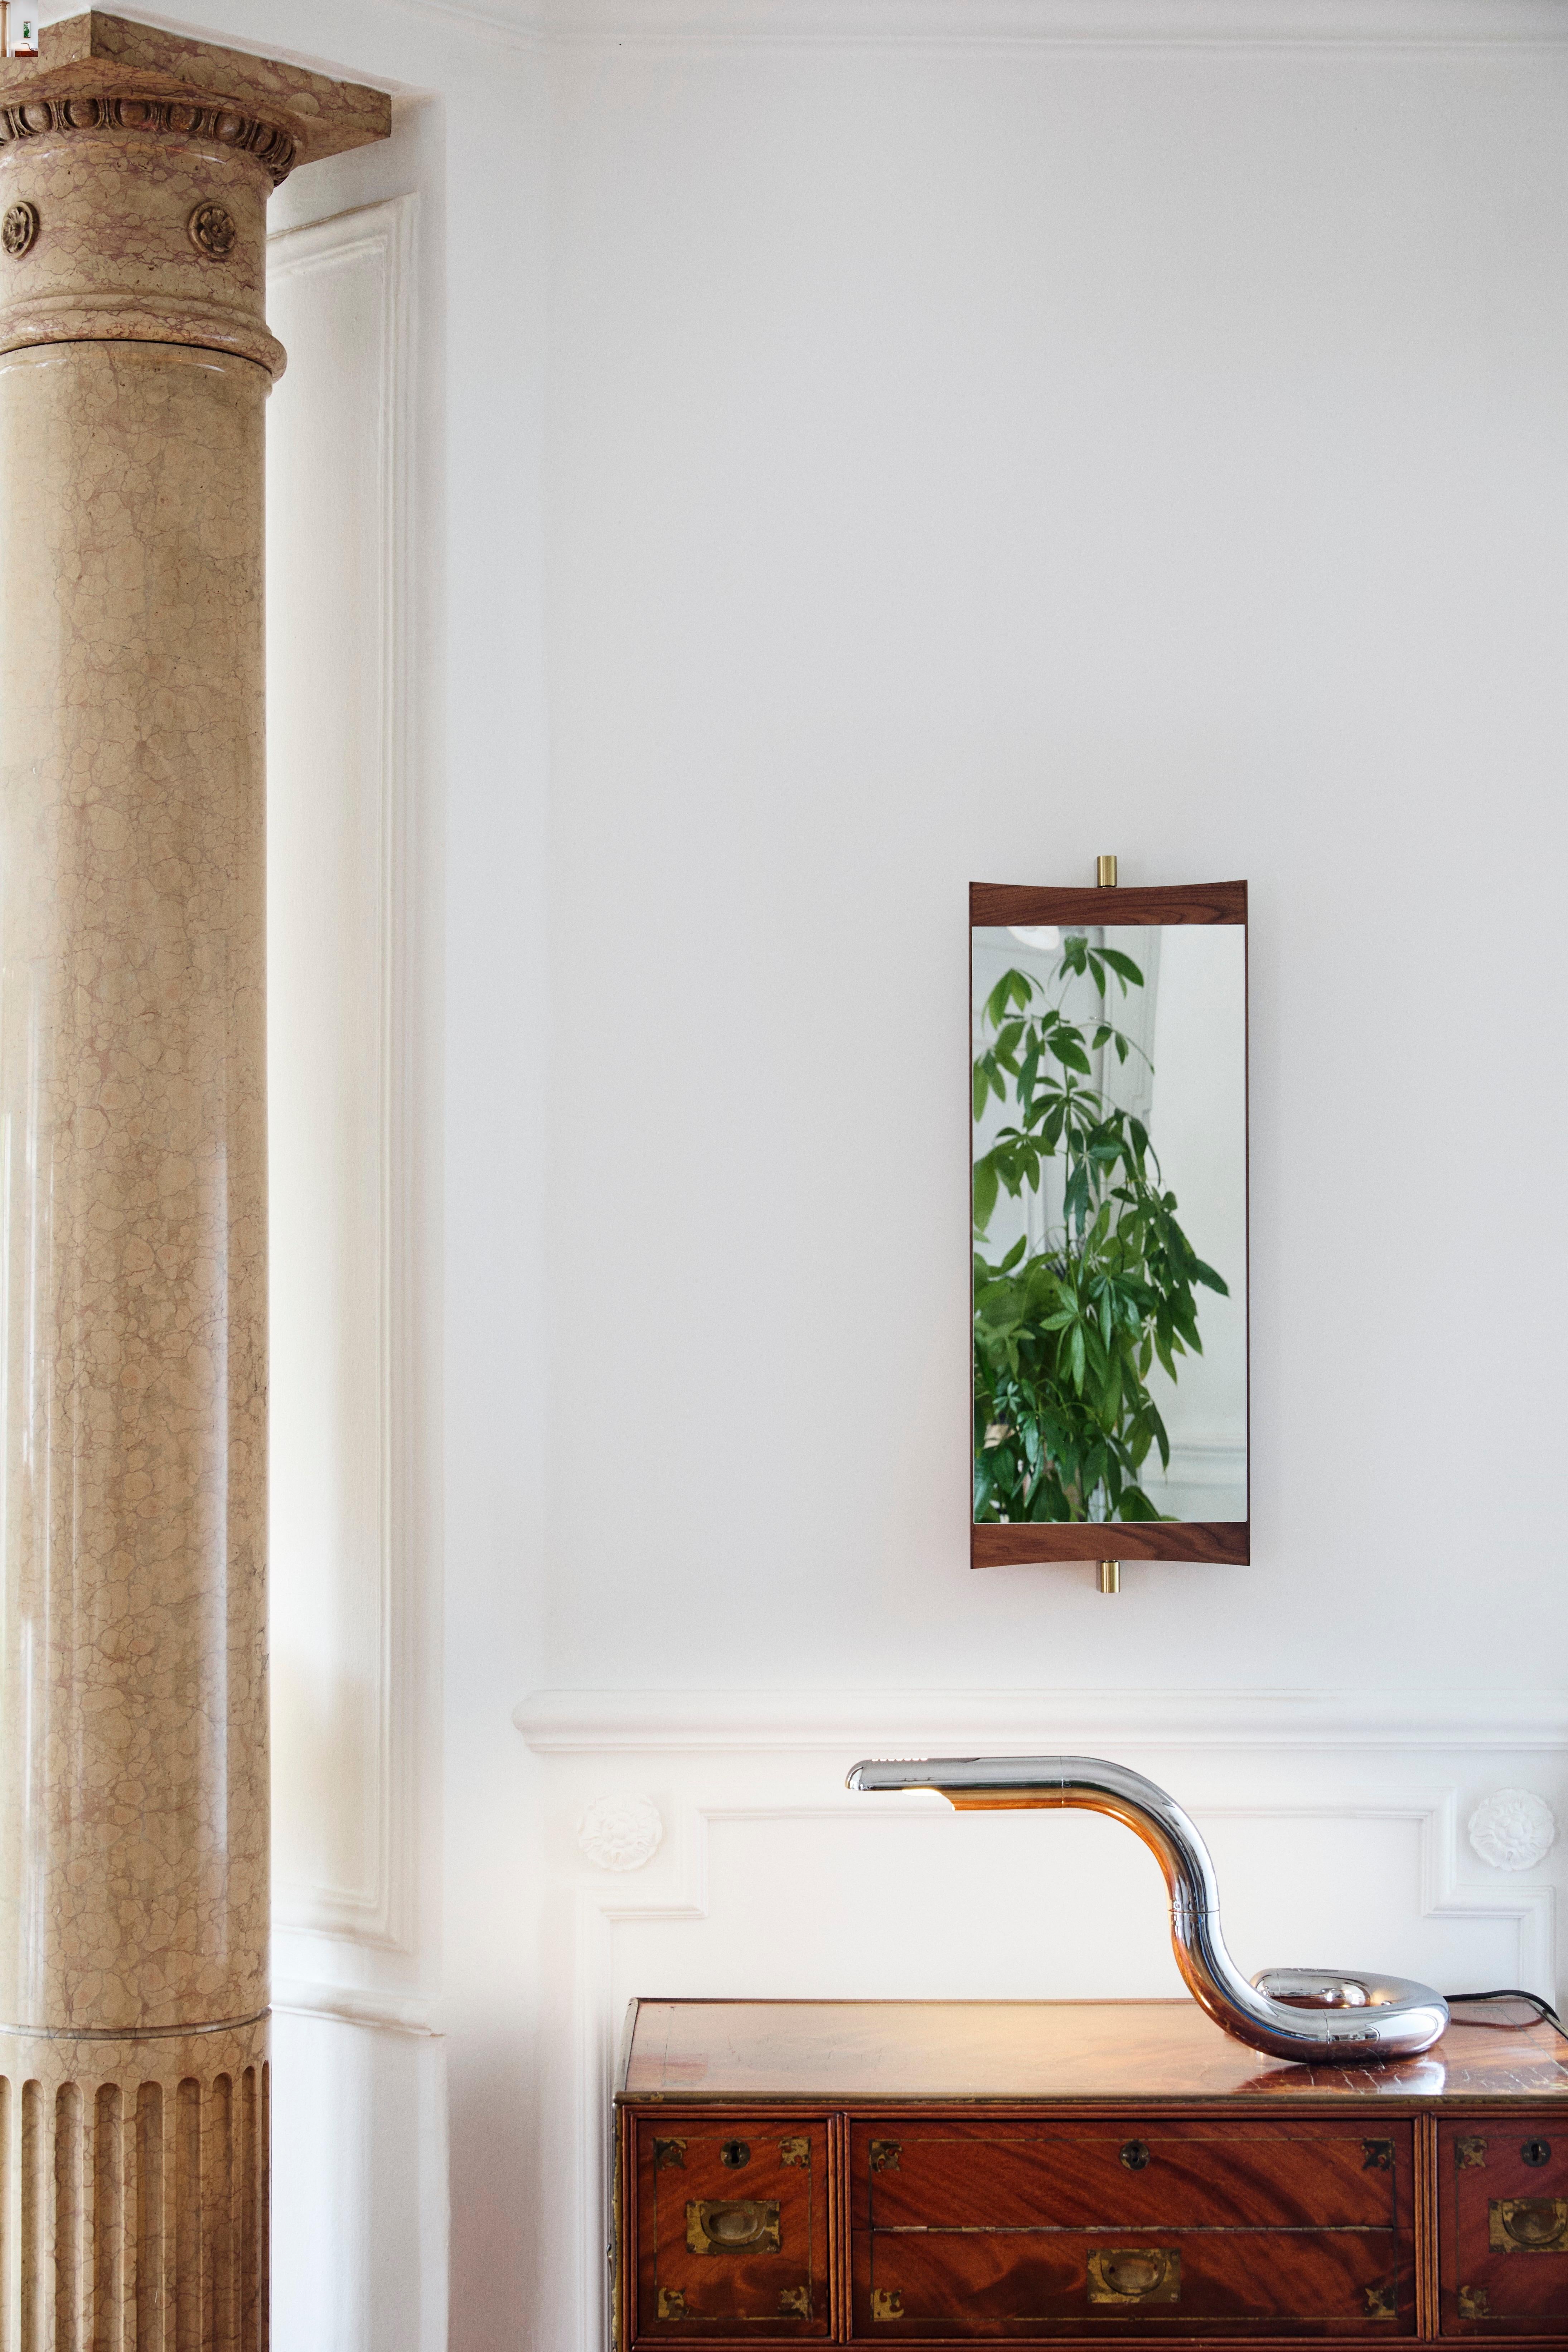 GamFratesi Vanity Mirror for GUBI.

This new collection of wall-mounted mirrors ingeniously reinvents the vanity mirror for contemporary interiors. Executed in walnut and brass, the Vanity mirror embodies GamFratesi’s ability to bring the highest